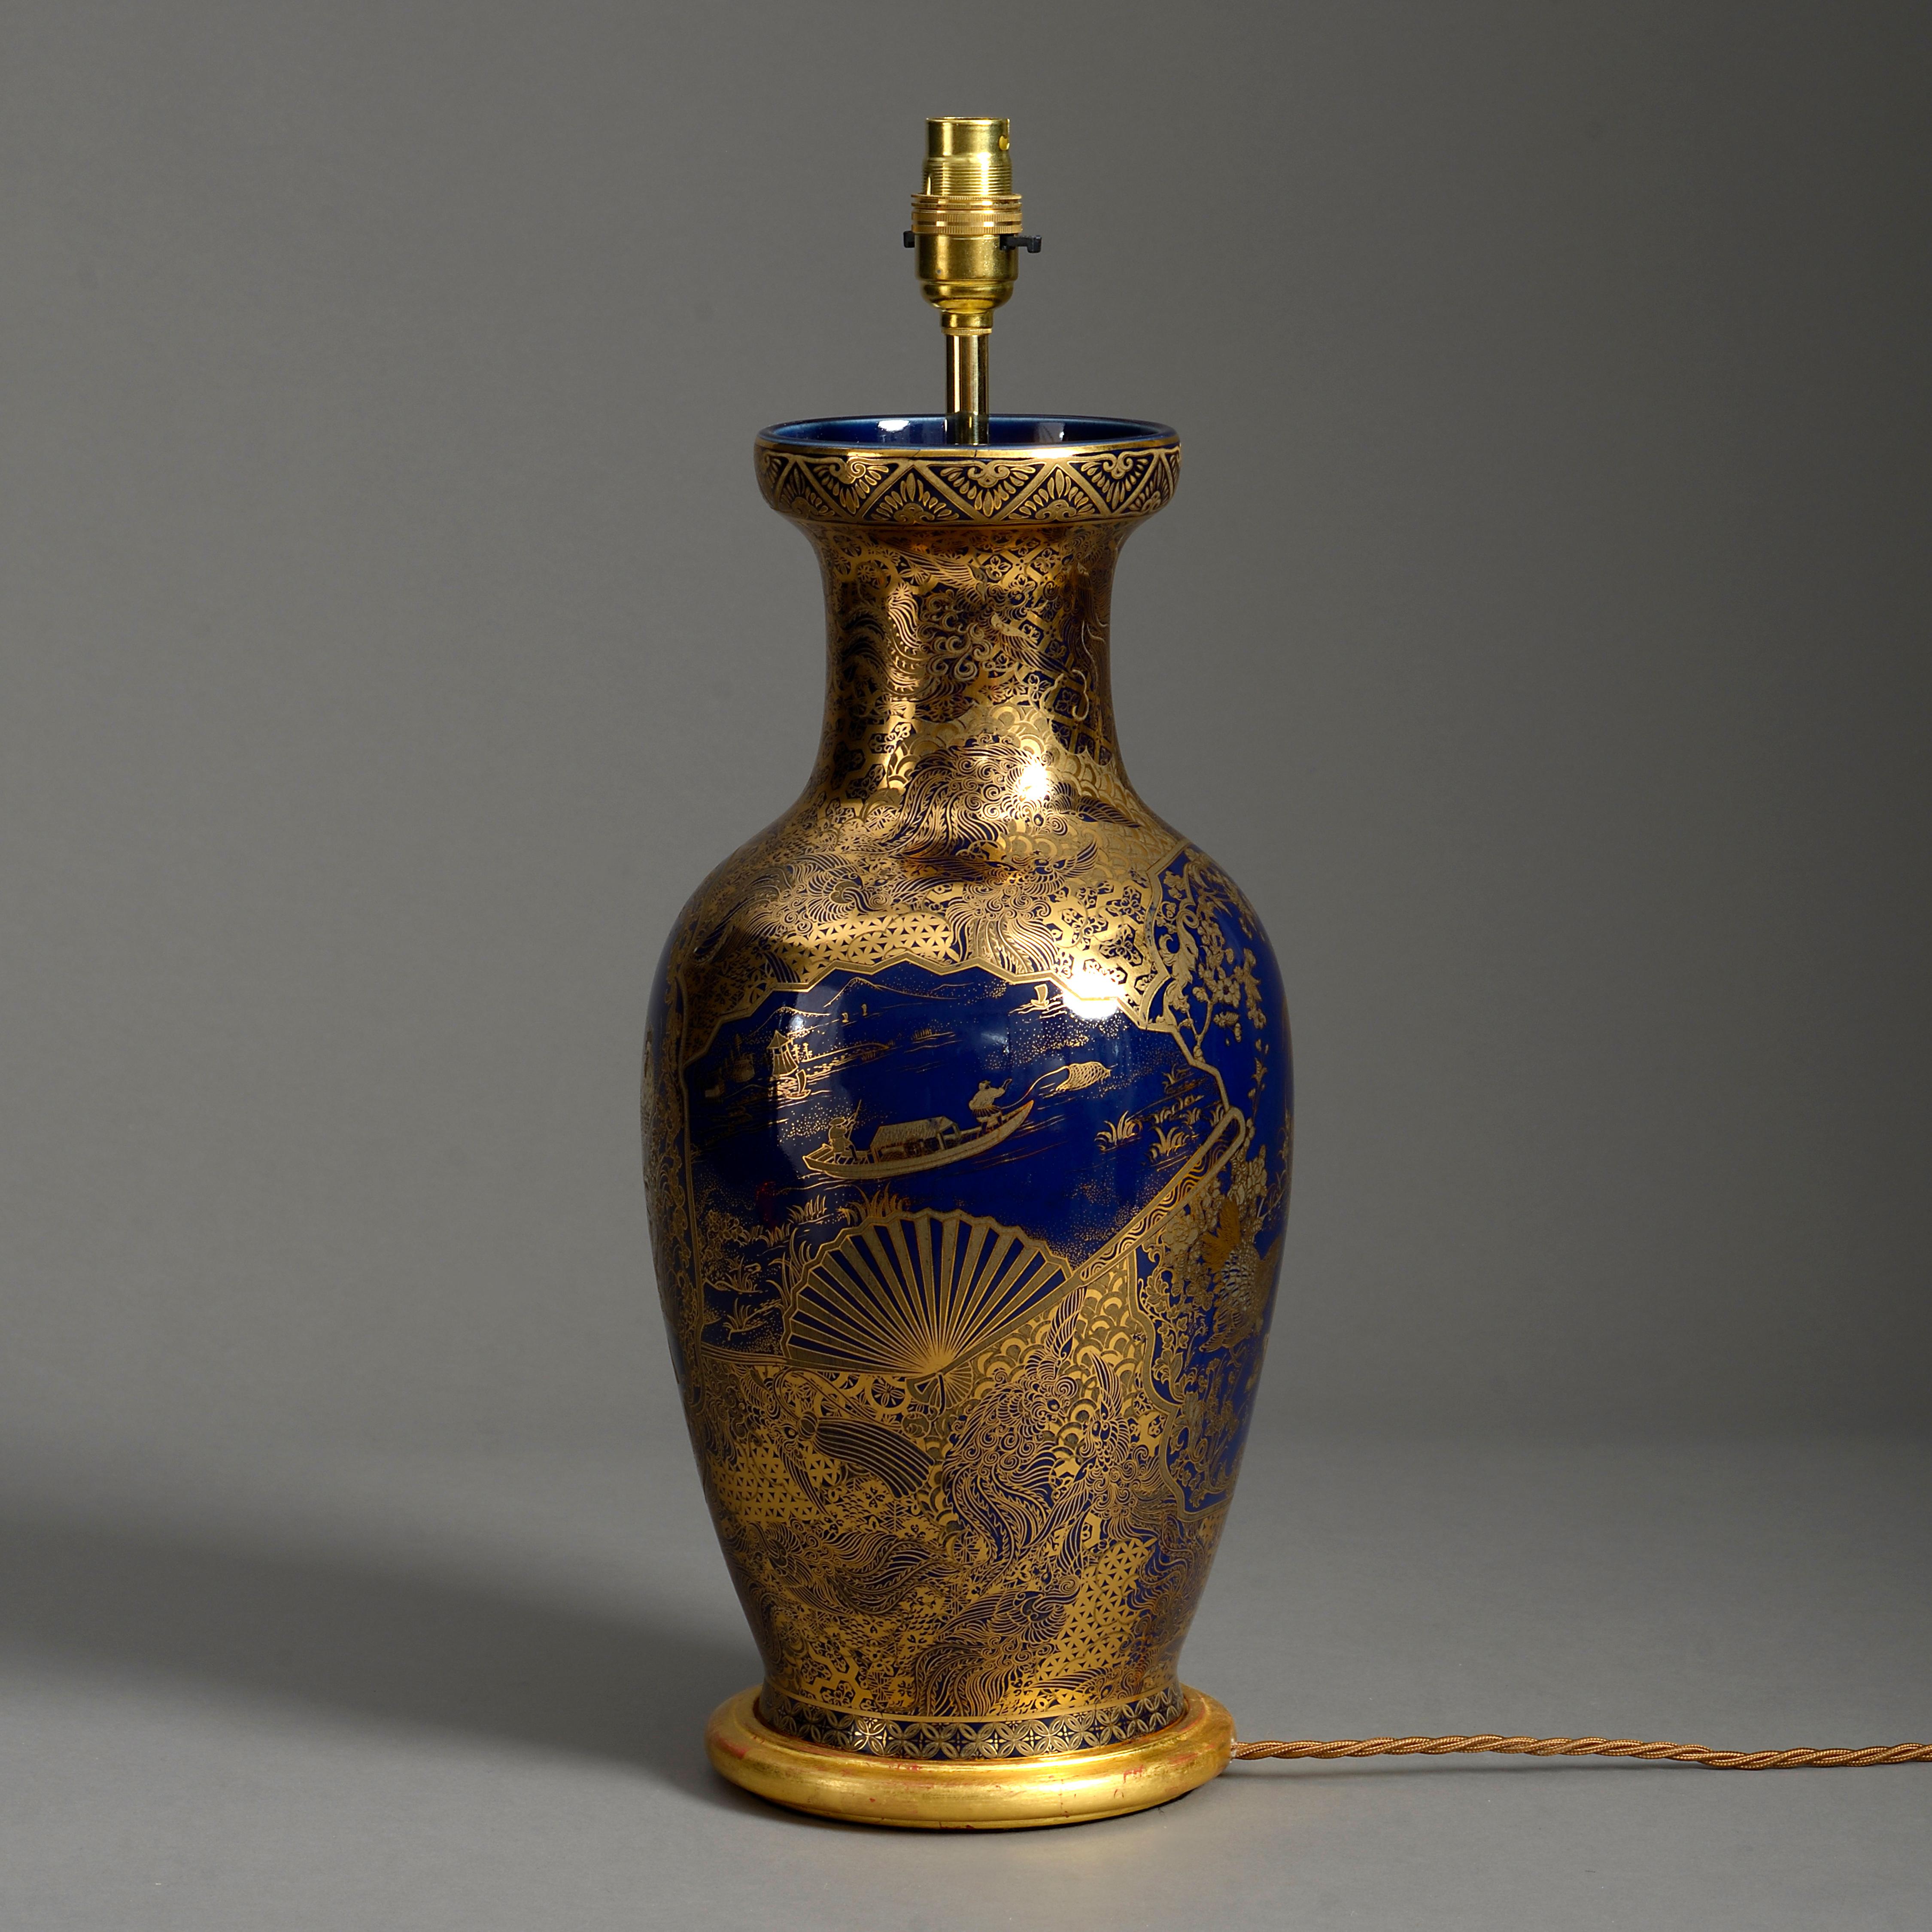 An early twentieth century baluster vase, decorated throughout with gilded fans, river scenes, birds, fish scales and other stylised emblems associated with Kimono designs. Now mounted on a hand-turned giltwood base as a lamp for electric